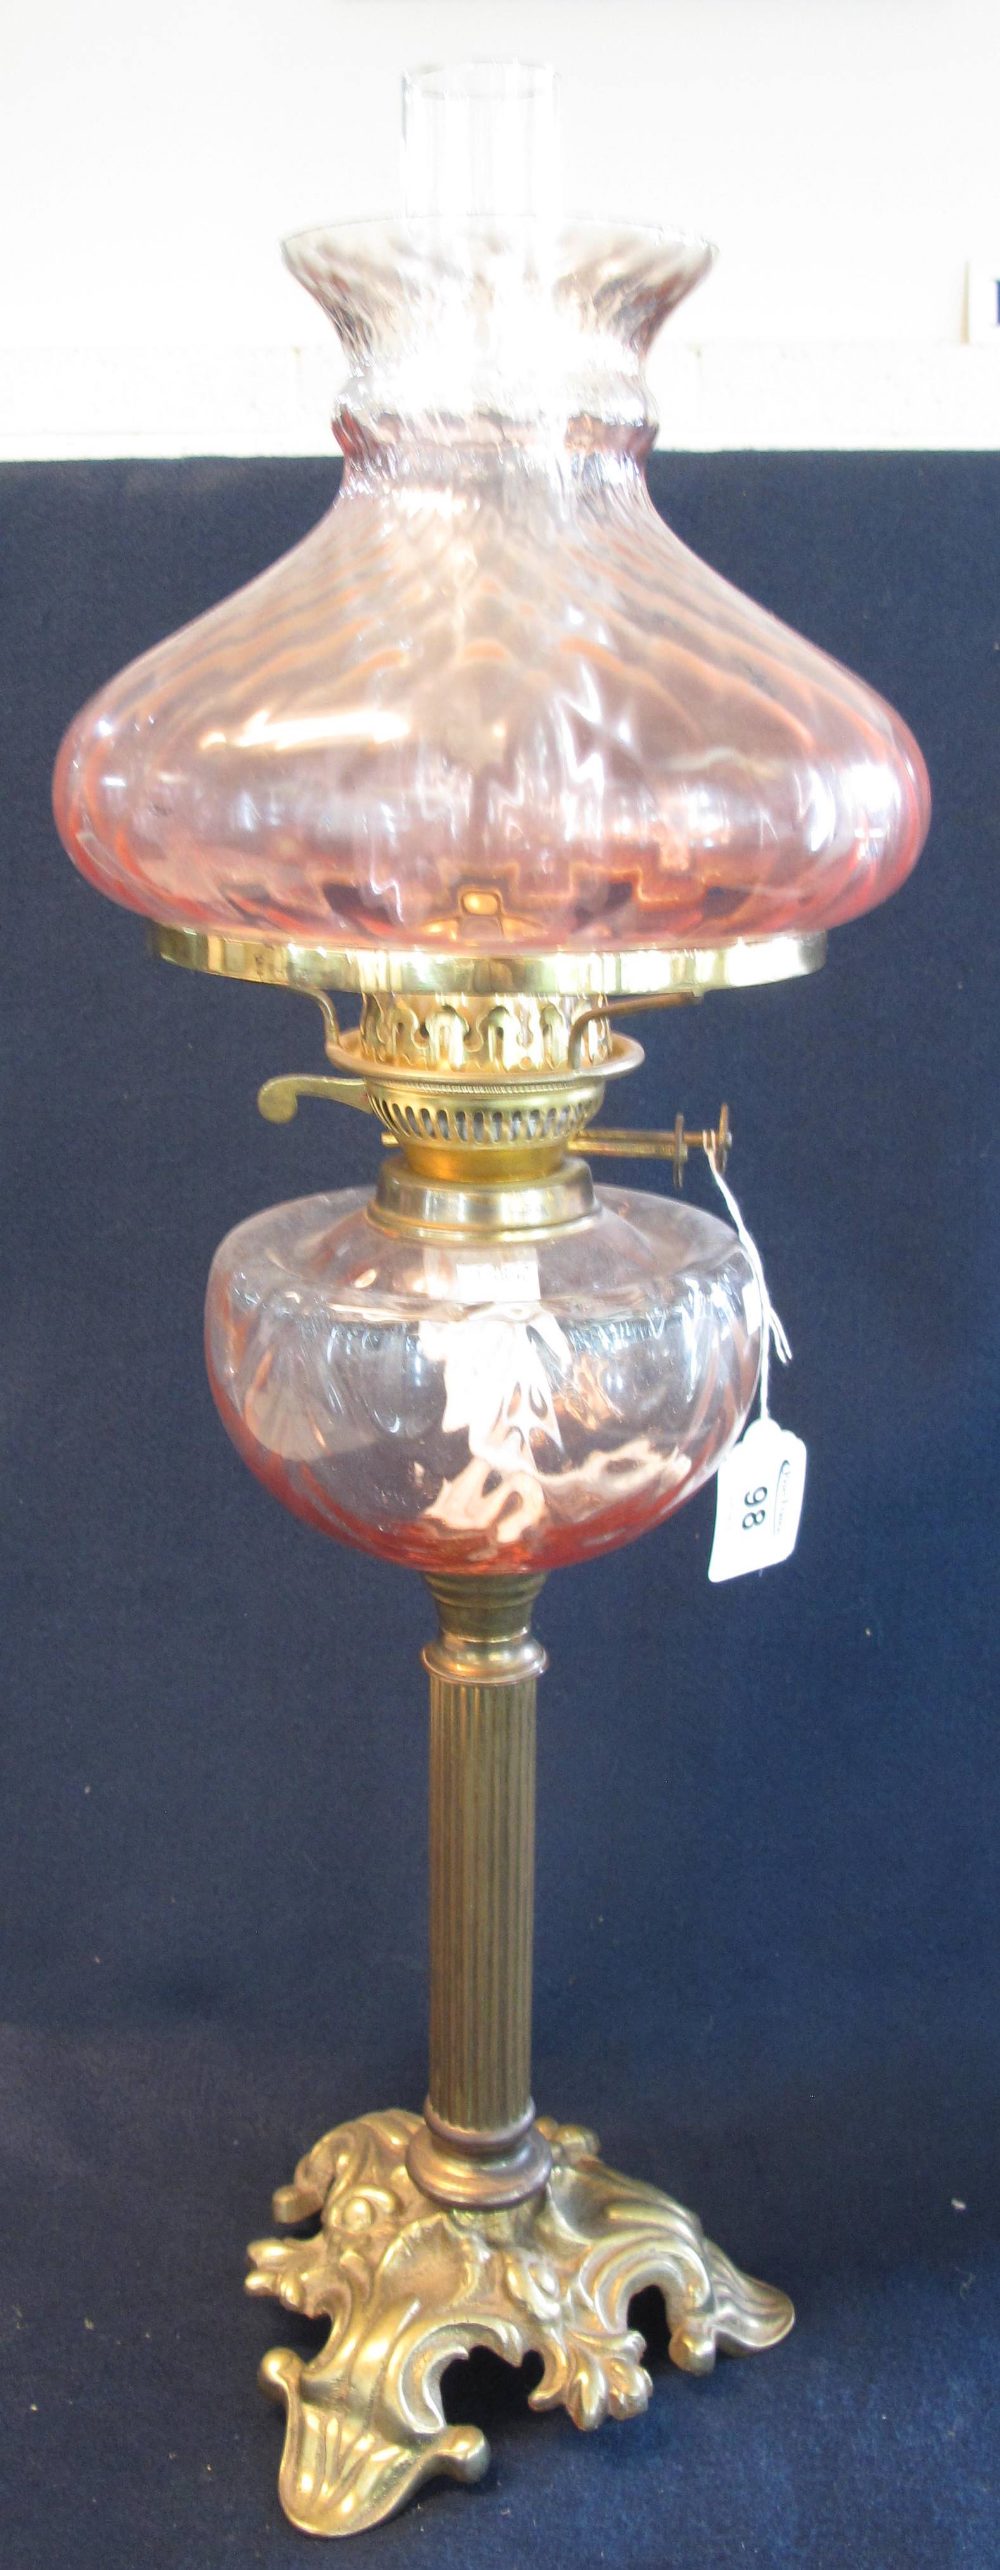 Brass double burner oil lamp with glass reservoir and brass pedestal base with a coloured glass